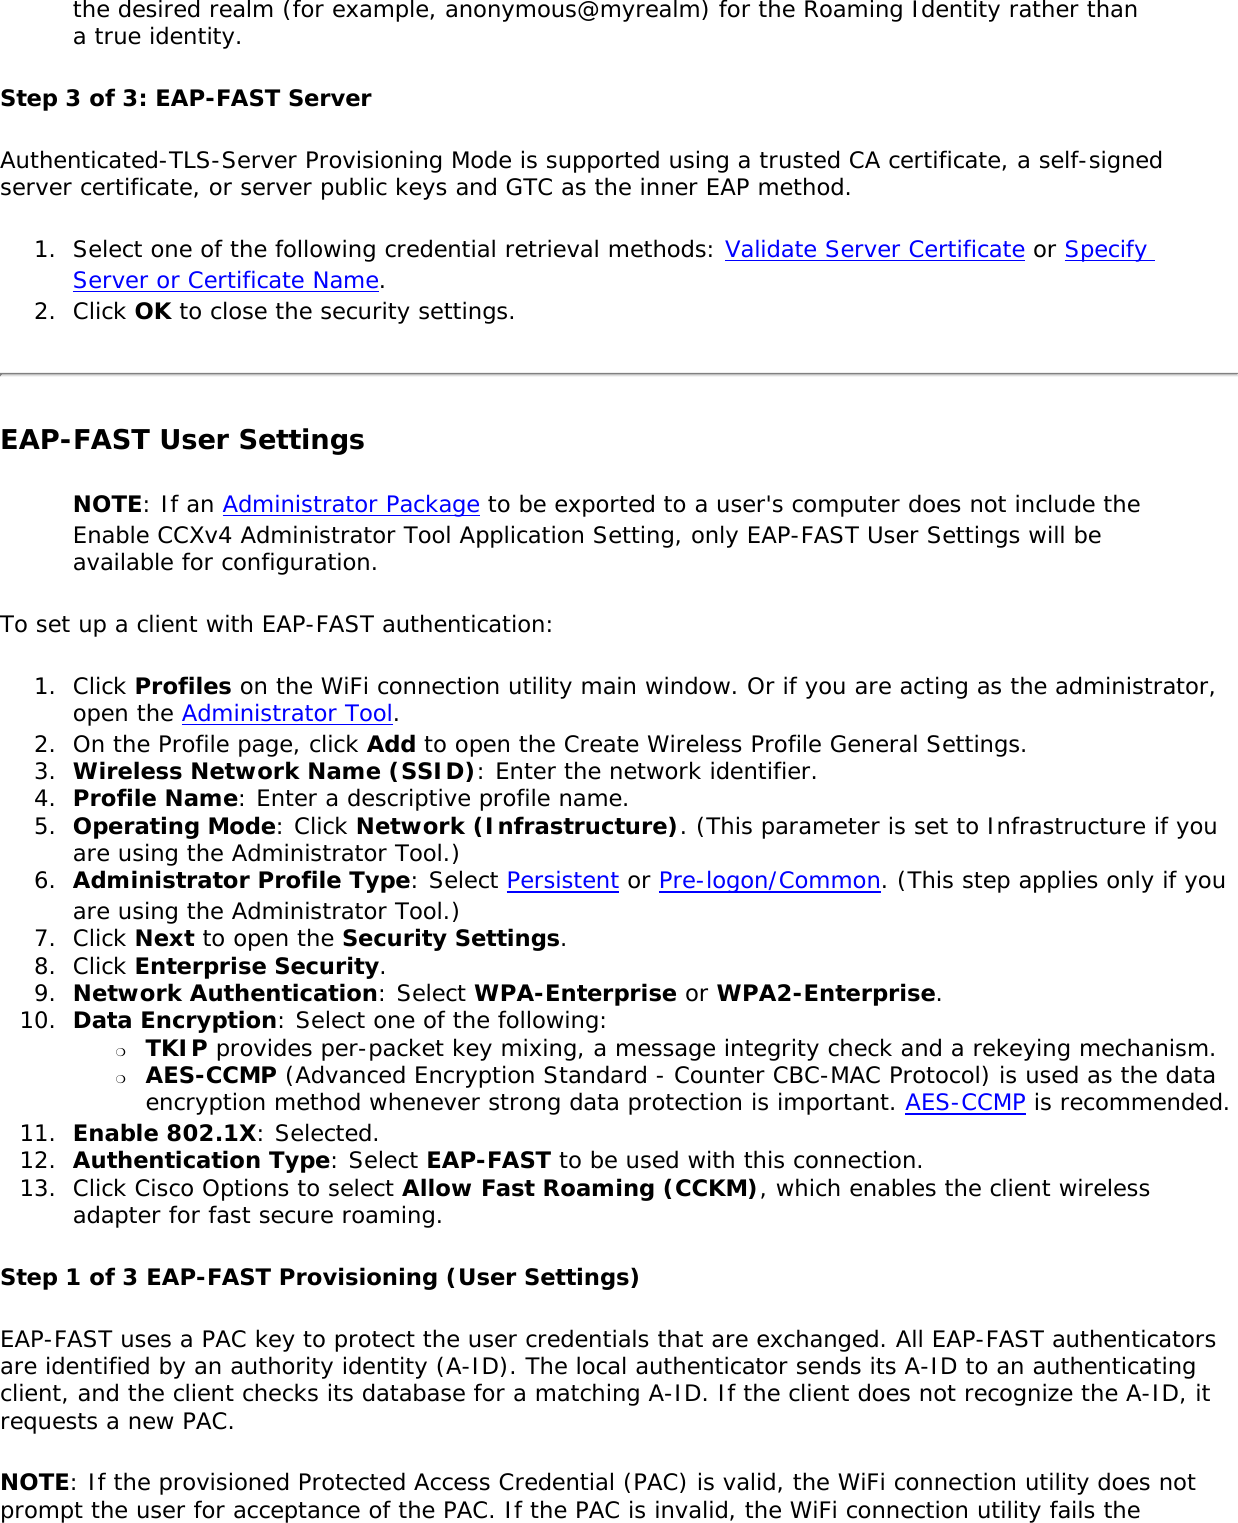 the desired realm (for example, anonymous@myrealm) for the Roaming Identity rather than a true identity.Step 3 of 3: EAP-FAST Server Authenticated-TLS-Server Provisioning Mode is supported using a trusted CA certificate, a self-signed server certificate, or server public keys and GTC as the inner EAP method.1.  Select one of the following credential retrieval methods: Validate Server Certificate or Specify Server or Certificate Name.2.  Click OK to close the security settings.EAP-FAST User SettingsNOTE: If an Administrator Package to be exported to a user&apos;s computer does not include the Enable CCXv4 Administrator Tool Application Setting, only EAP-FAST User Settings will be available for configuration.To set up a client with EAP-FAST authentication:1.  Click Profiles on the WiFi connection utility main window. Or if you are acting as the administrator, open the Administrator Tool. 2.  On the Profile page, click Add to open the Create Wireless Profile General Settings.3.  Wireless Network Name (SSID): Enter the network identifier.4.  Profile Name: Enter a descriptive profile name.5.  Operating Mode: Click Network (Infrastructure). (This parameter is set to Infrastructure if you are using the Administrator Tool.)6.  Administrator Profile Type: Select Persistent or Pre-logon/Common. (This step applies only if you are using the Administrator Tool.)7.  Click Next to open the Security Settings.8.  Click Enterprise Security.9.  Network Authentication: Select WPA-Enterprise or WPA2-Enterprise.10.  Data Encryption: Select one of the following: ❍     TKIP provides per-packet key mixing, a message integrity check and a rekeying mechanism.❍     AES-CCMP (Advanced Encryption Standard - Counter CBC-MAC Protocol) is used as the data encryption method whenever strong data protection is important. AES-CCMP is recommended.11.  Enable 802.1X: Selected.12.  Authentication Type: Select EAP-FAST to be used with this connection.13.  Click Cisco Options to select Allow Fast Roaming (CCKM), which enables the client wireless adapter for fast secure roaming.Step 1 of 3 EAP-FAST Provisioning (User Settings) EAP-FAST uses a PAC key to protect the user credentials that are exchanged. All EAP-FAST authenticators are identified by an authority identity (A-ID). The local authenticator sends its A-ID to an authenticating client, and the client checks its database for a matching A-ID. If the client does not recognize the A-ID, it requests a new PAC.NOTE: If the provisioned Protected Access Credential (PAC) is valid, the WiFi connection utility does not prompt the user for acceptance of the PAC. If the PAC is invalid, the WiFi connection utility fails the 